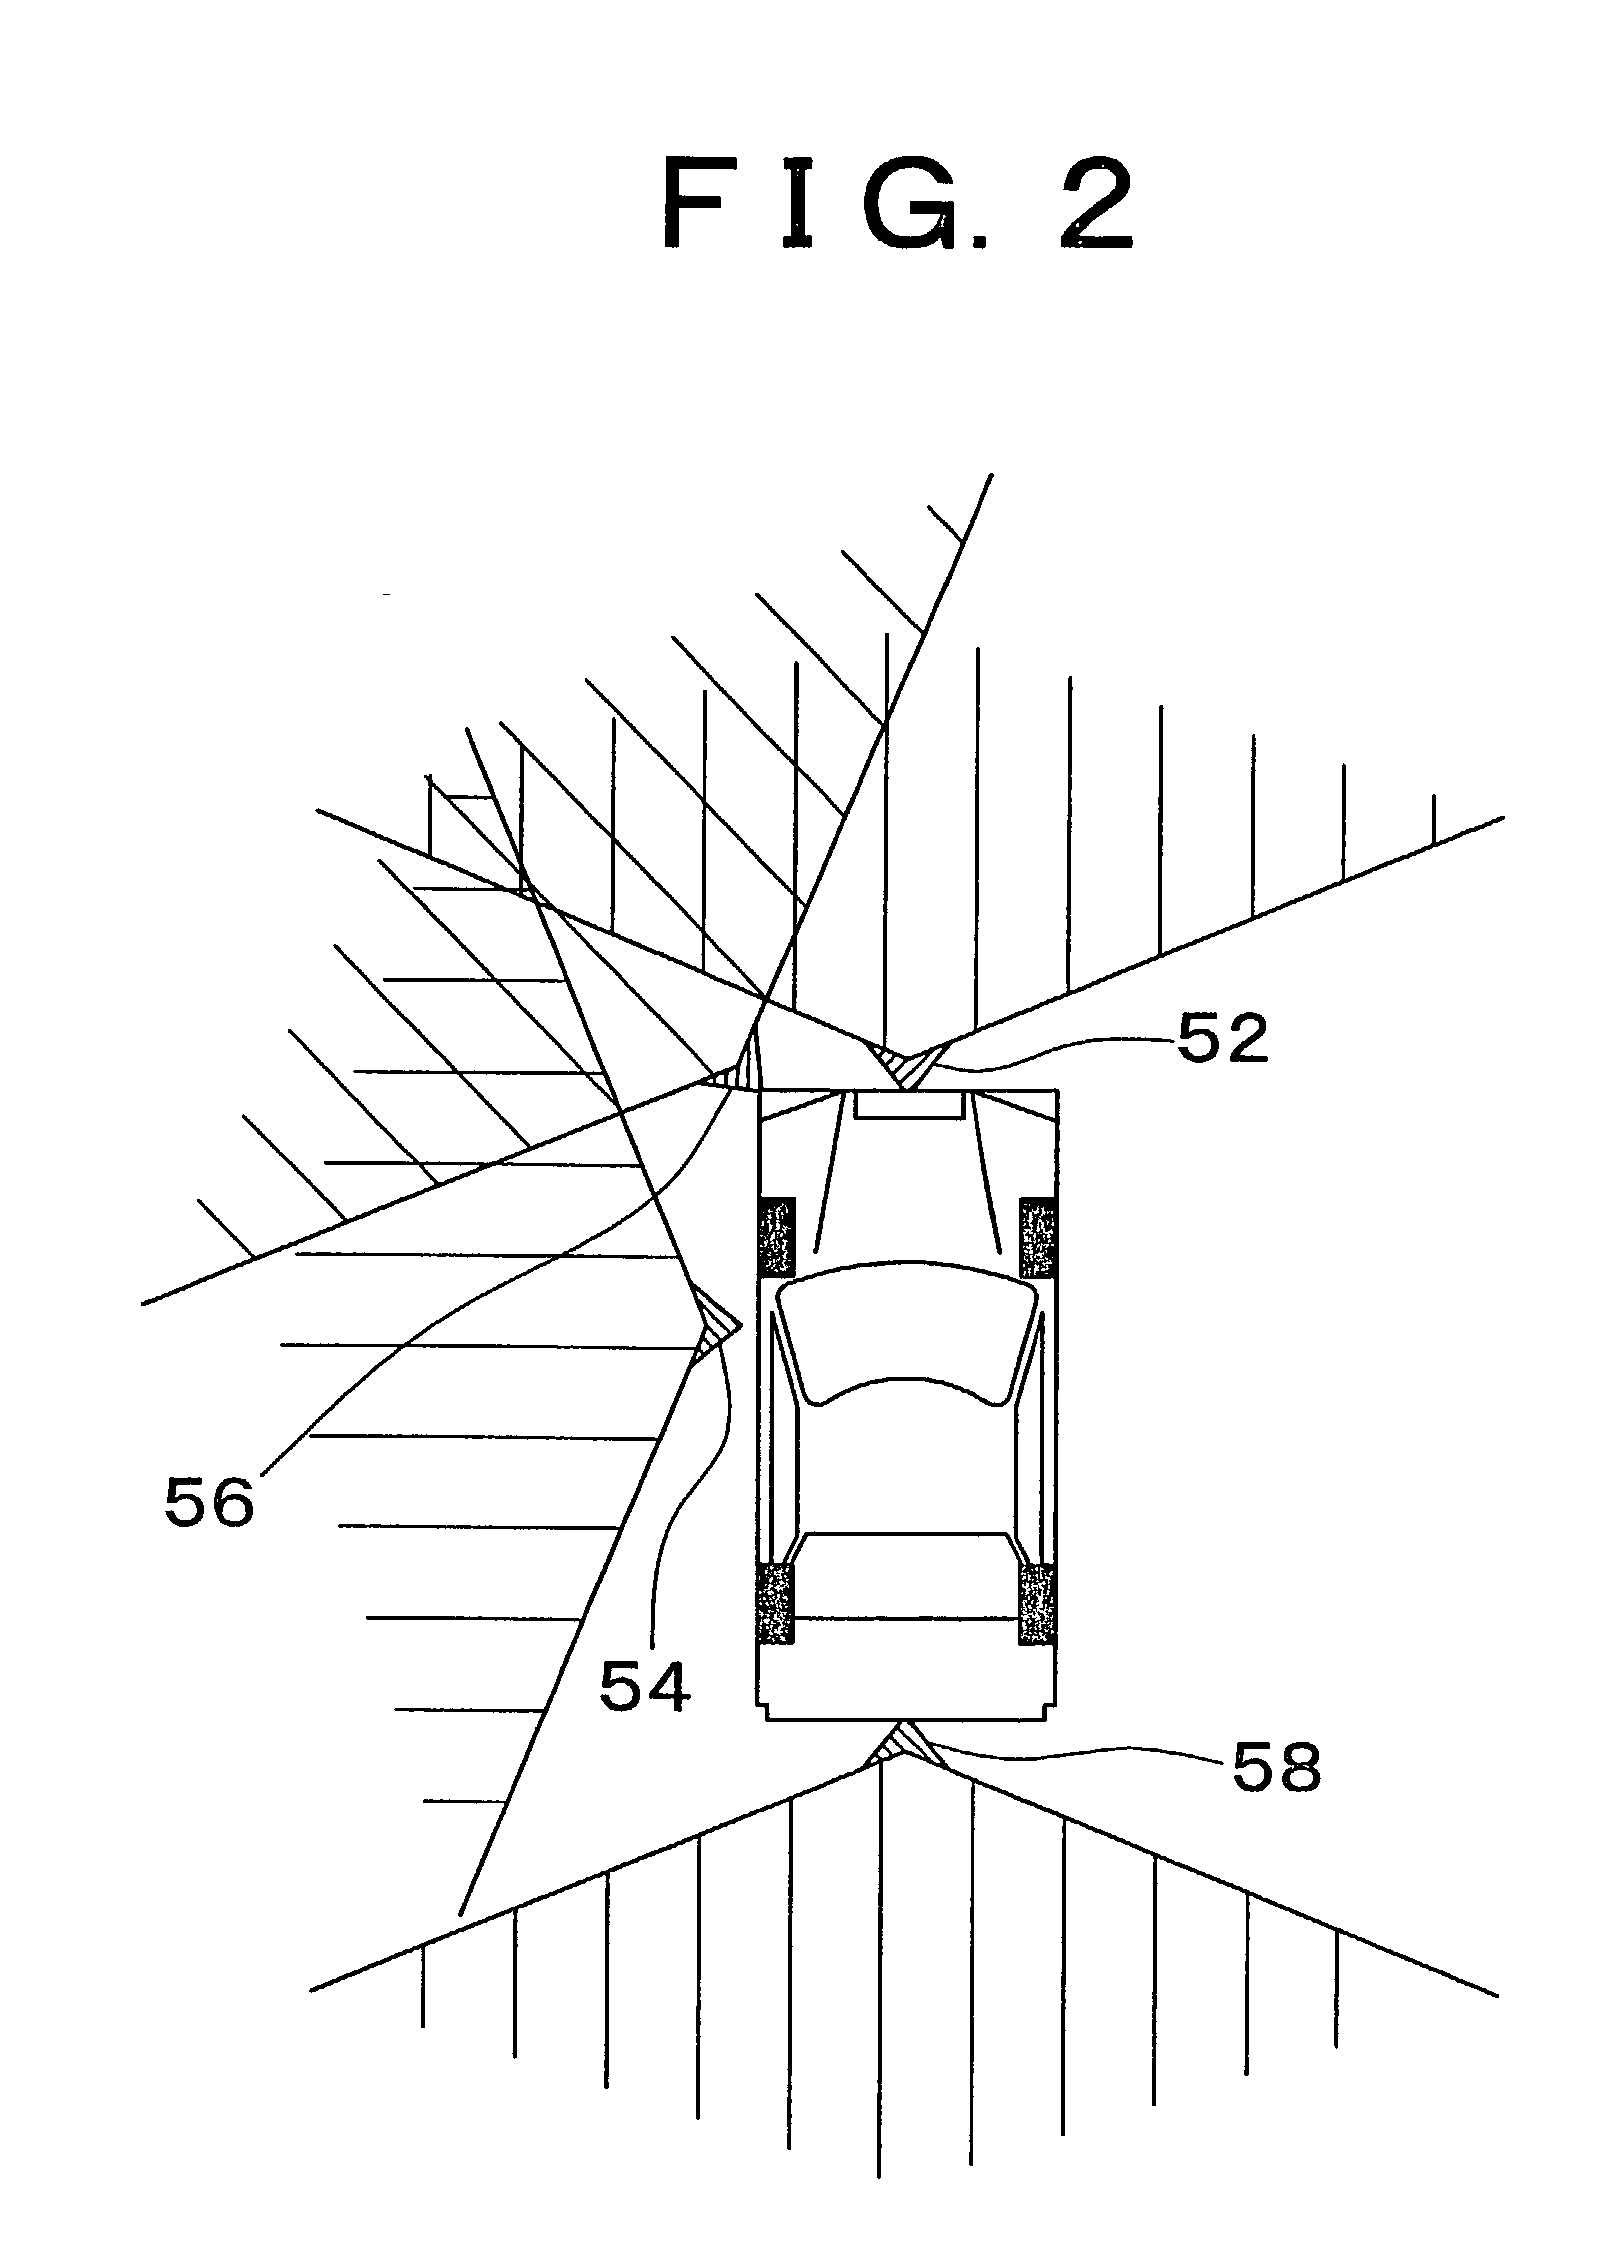 Device for monitoring area around vehicle